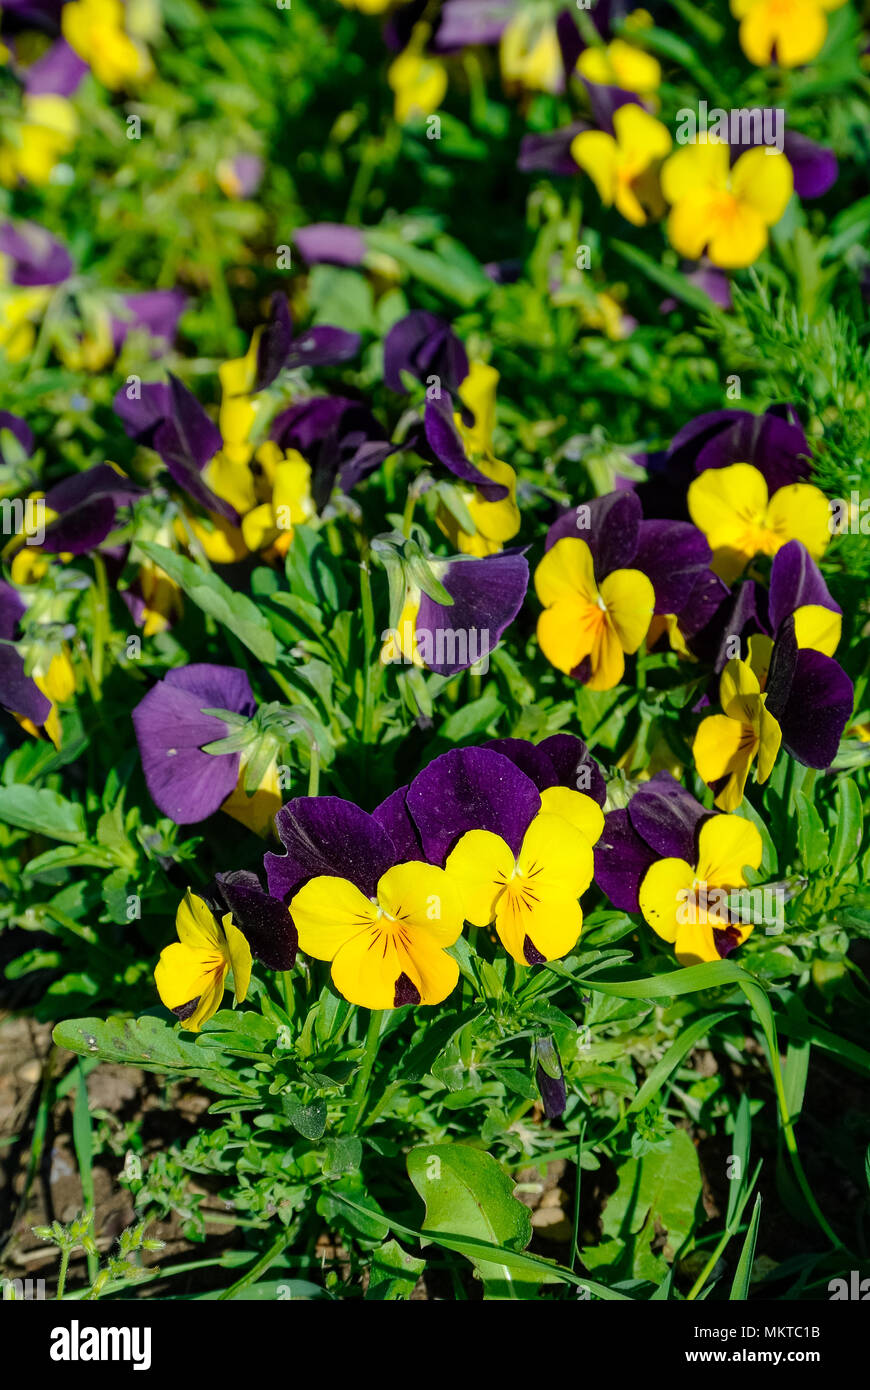 Cool wave pansy flowers, Paris, France Stock Photo